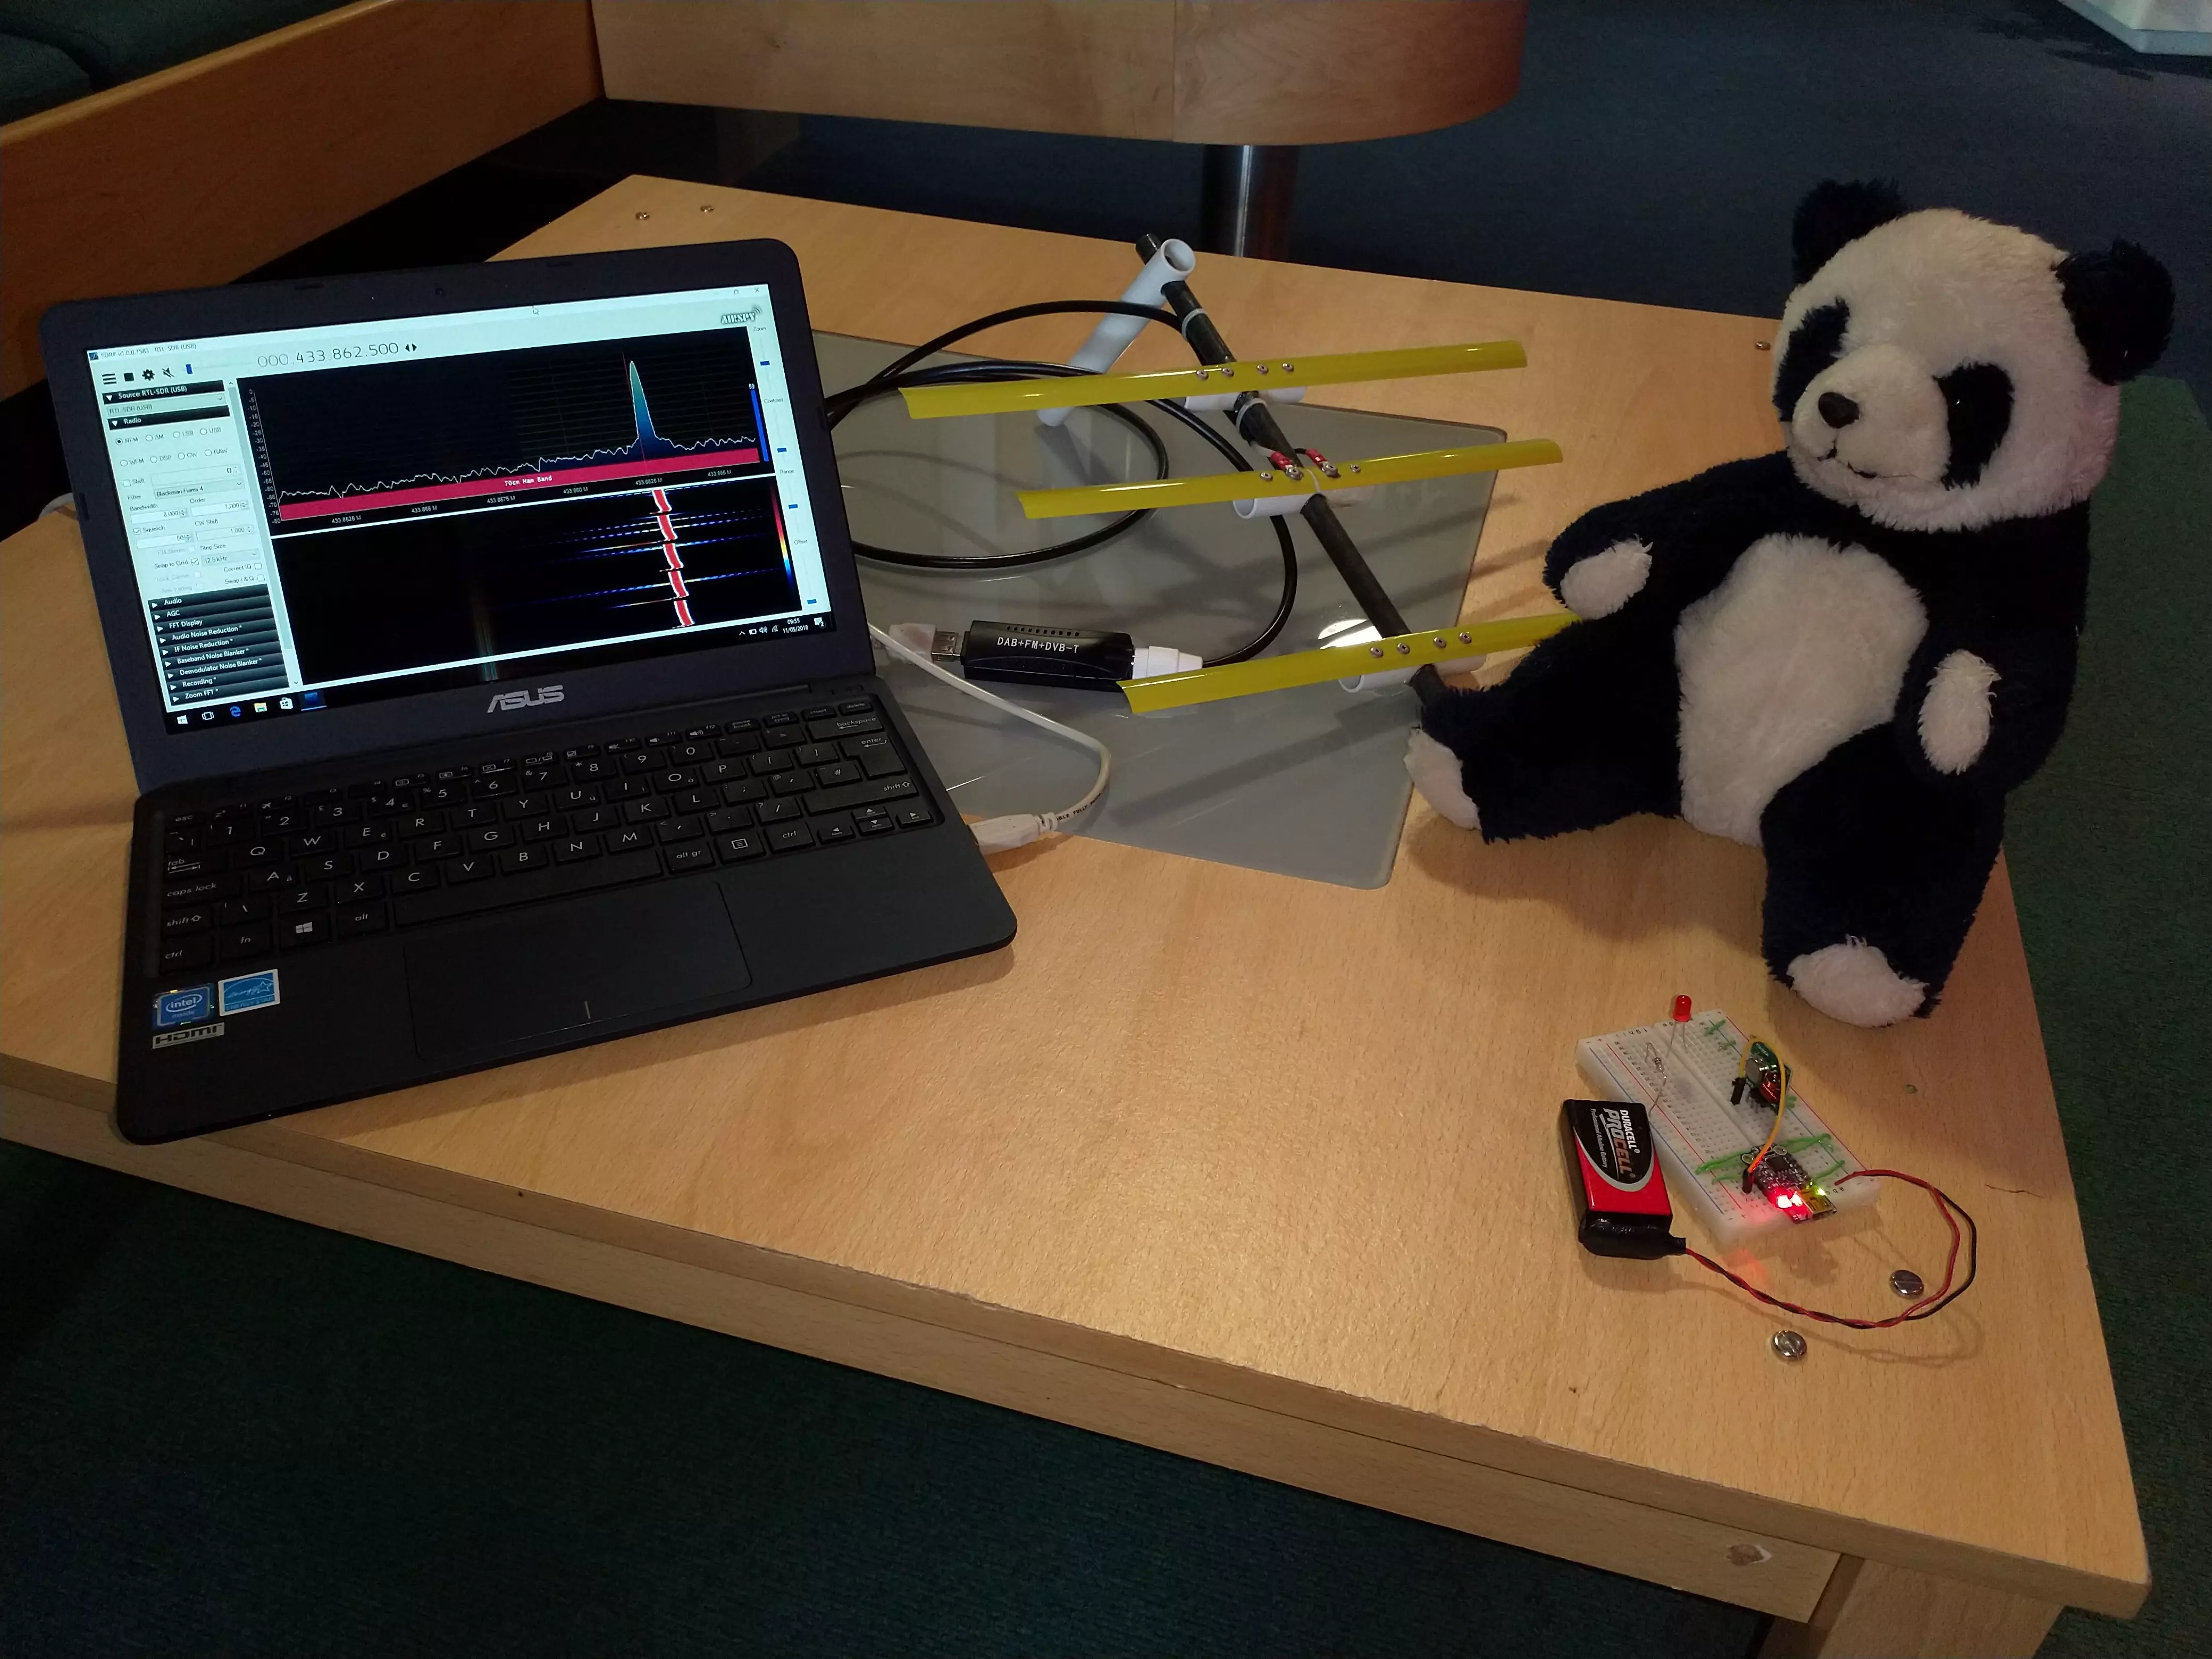 A directional antenna connected to a laptop showing signals from a transmitter next to a toy panda